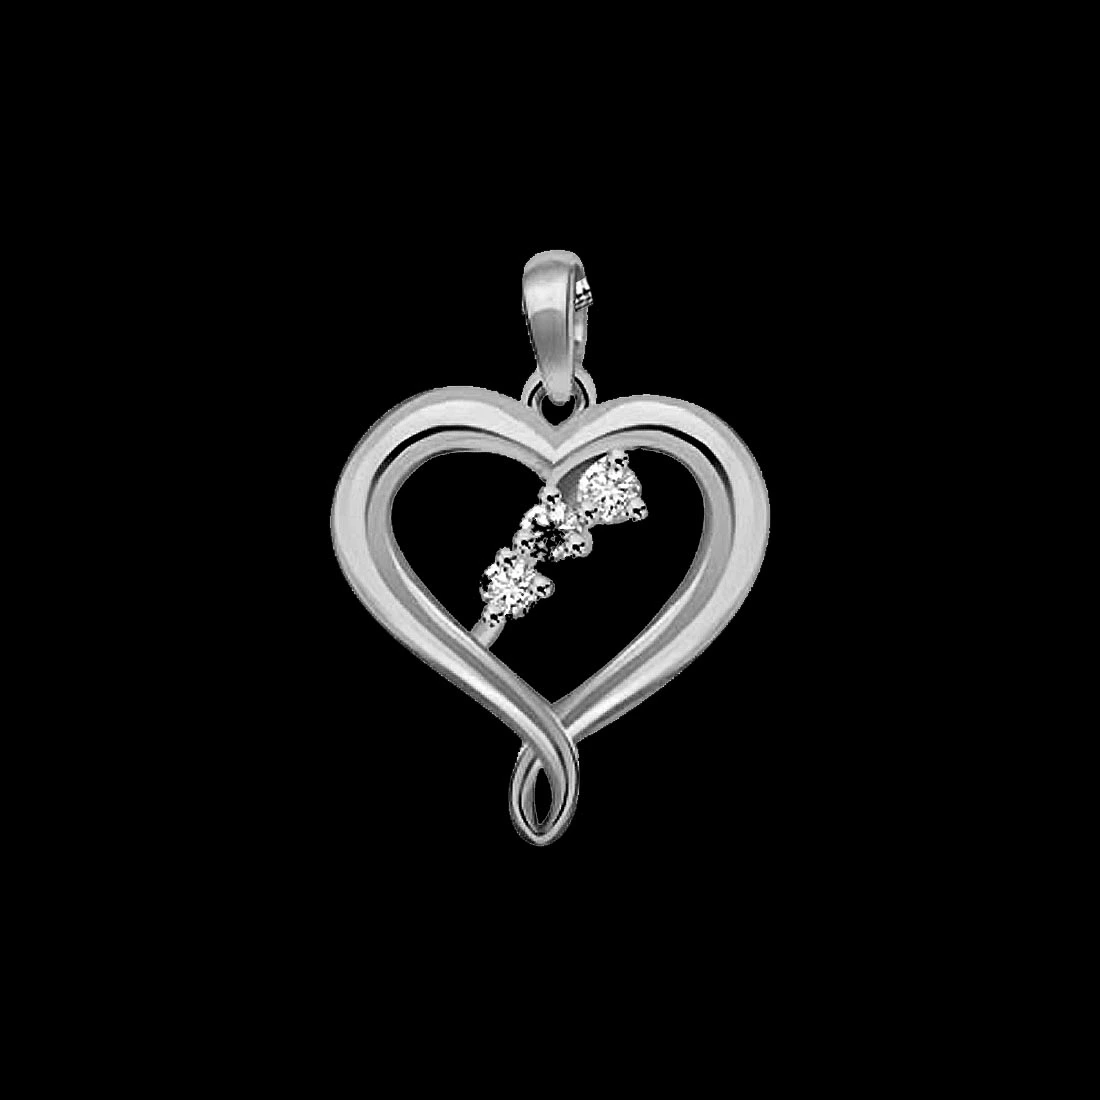 Precious Memories - Real Diamond & Sterling Silver Pendant with 18 IN Chain (SDP147)